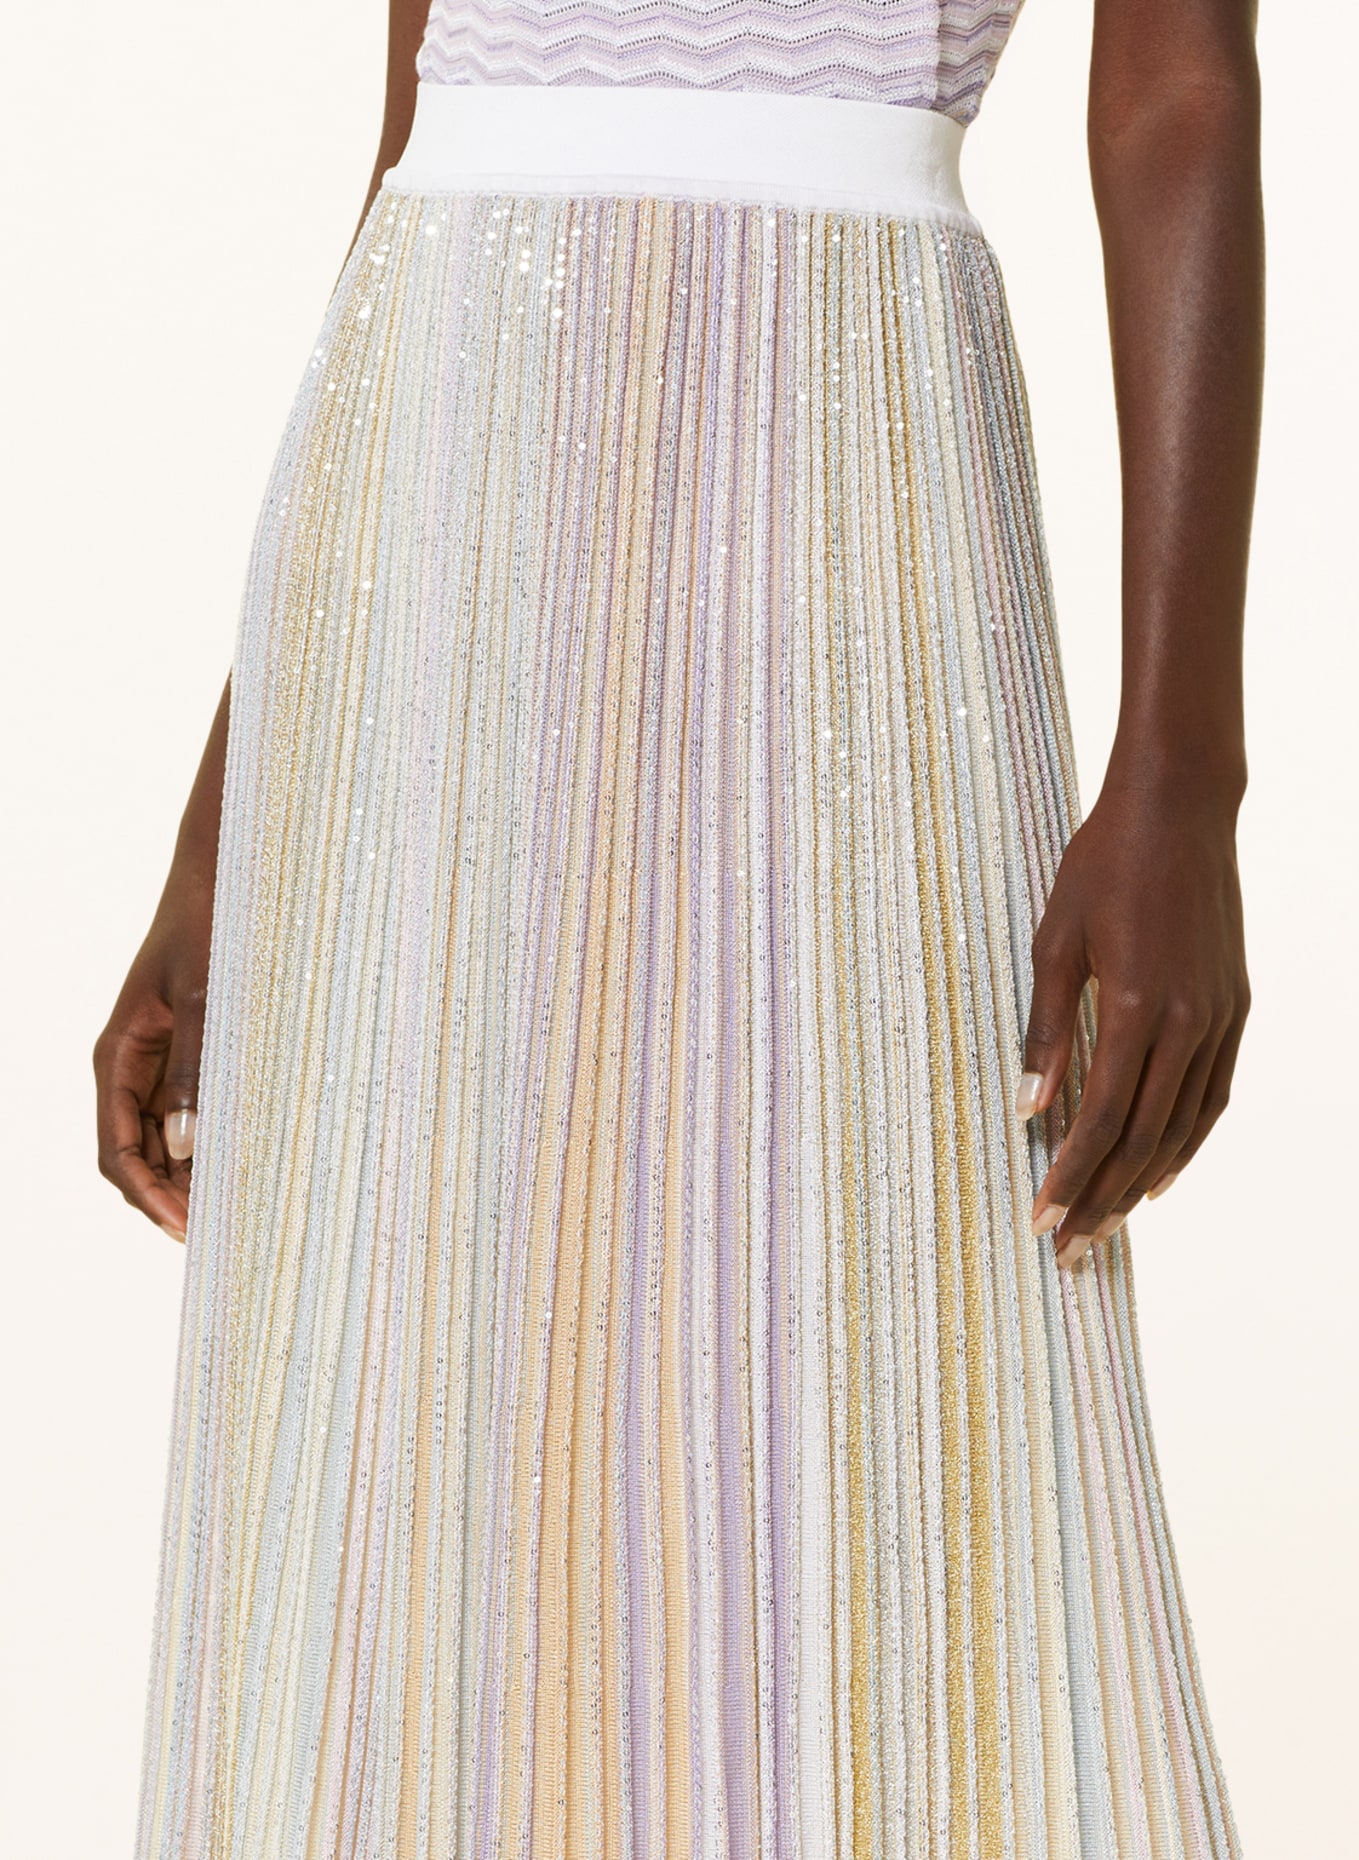 MISSONI Knit skirt with glitter thread and sequins, Color: WHITE/ LIGHT PURPLE/ LIGHT BLUE (Image 4)